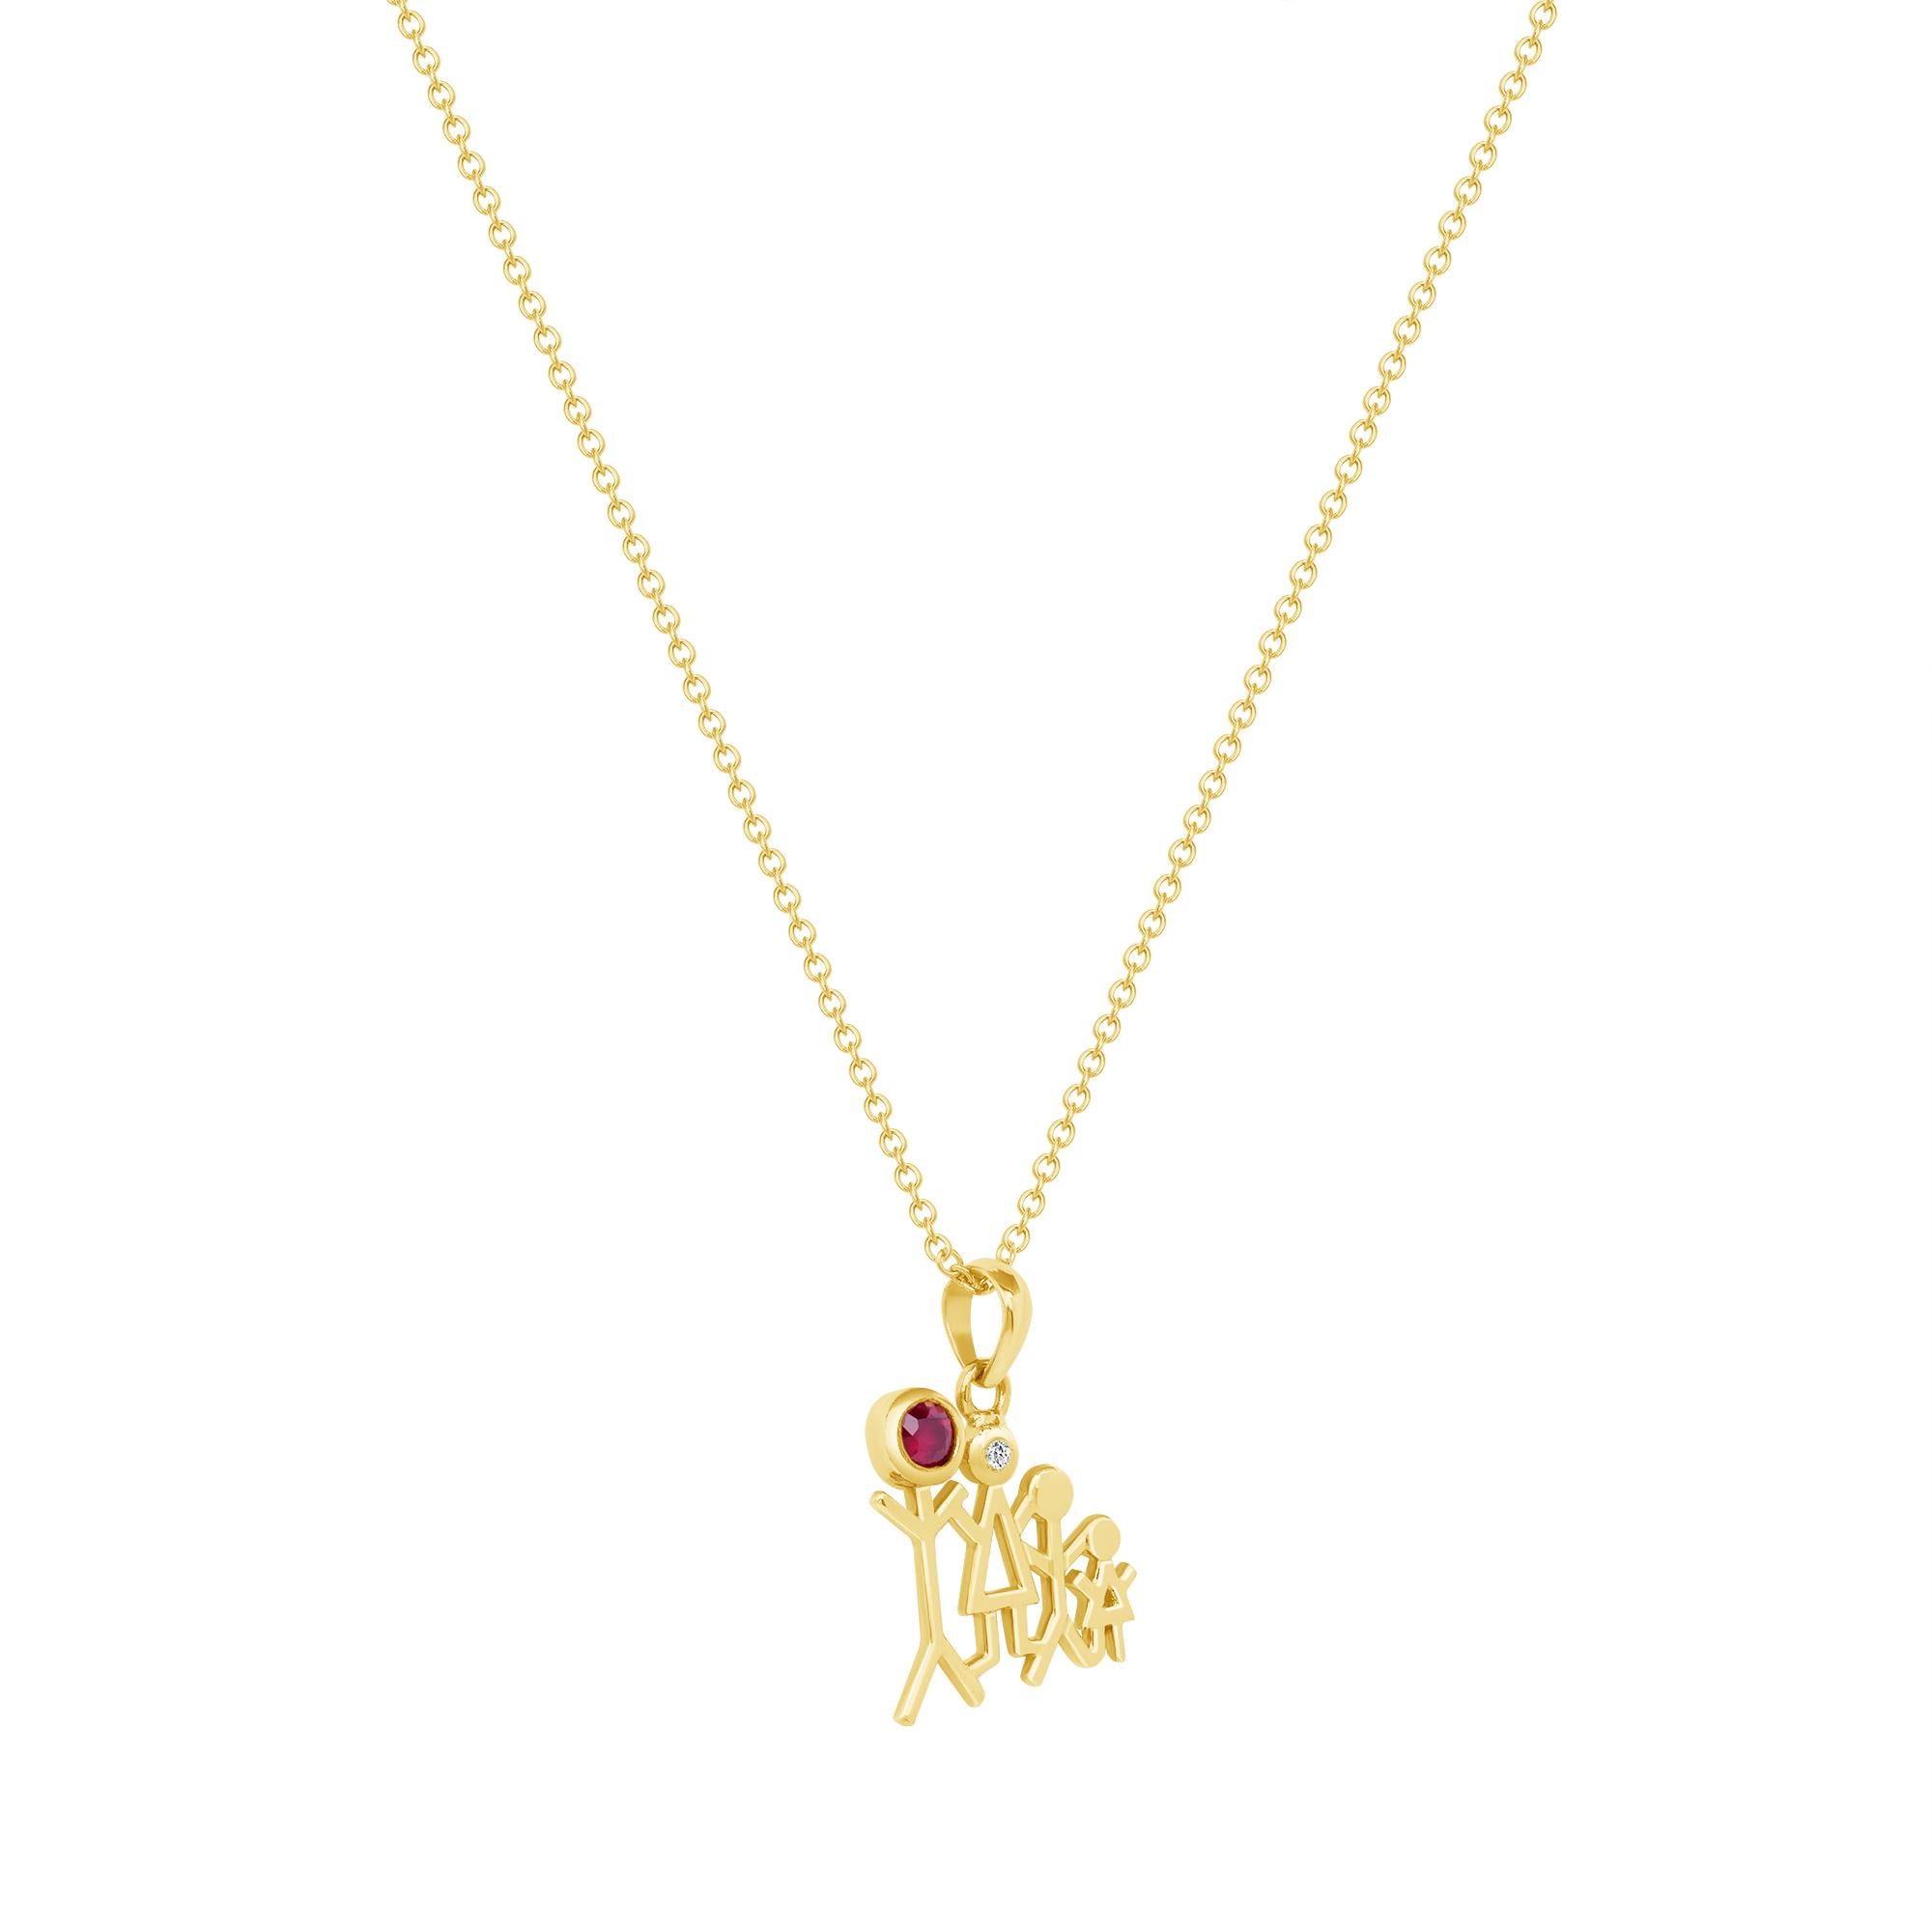 Round Cut 0.10 Carat Ruby Diamond Yellow Gold Family Stick Figure Pendant Necklace For Sale